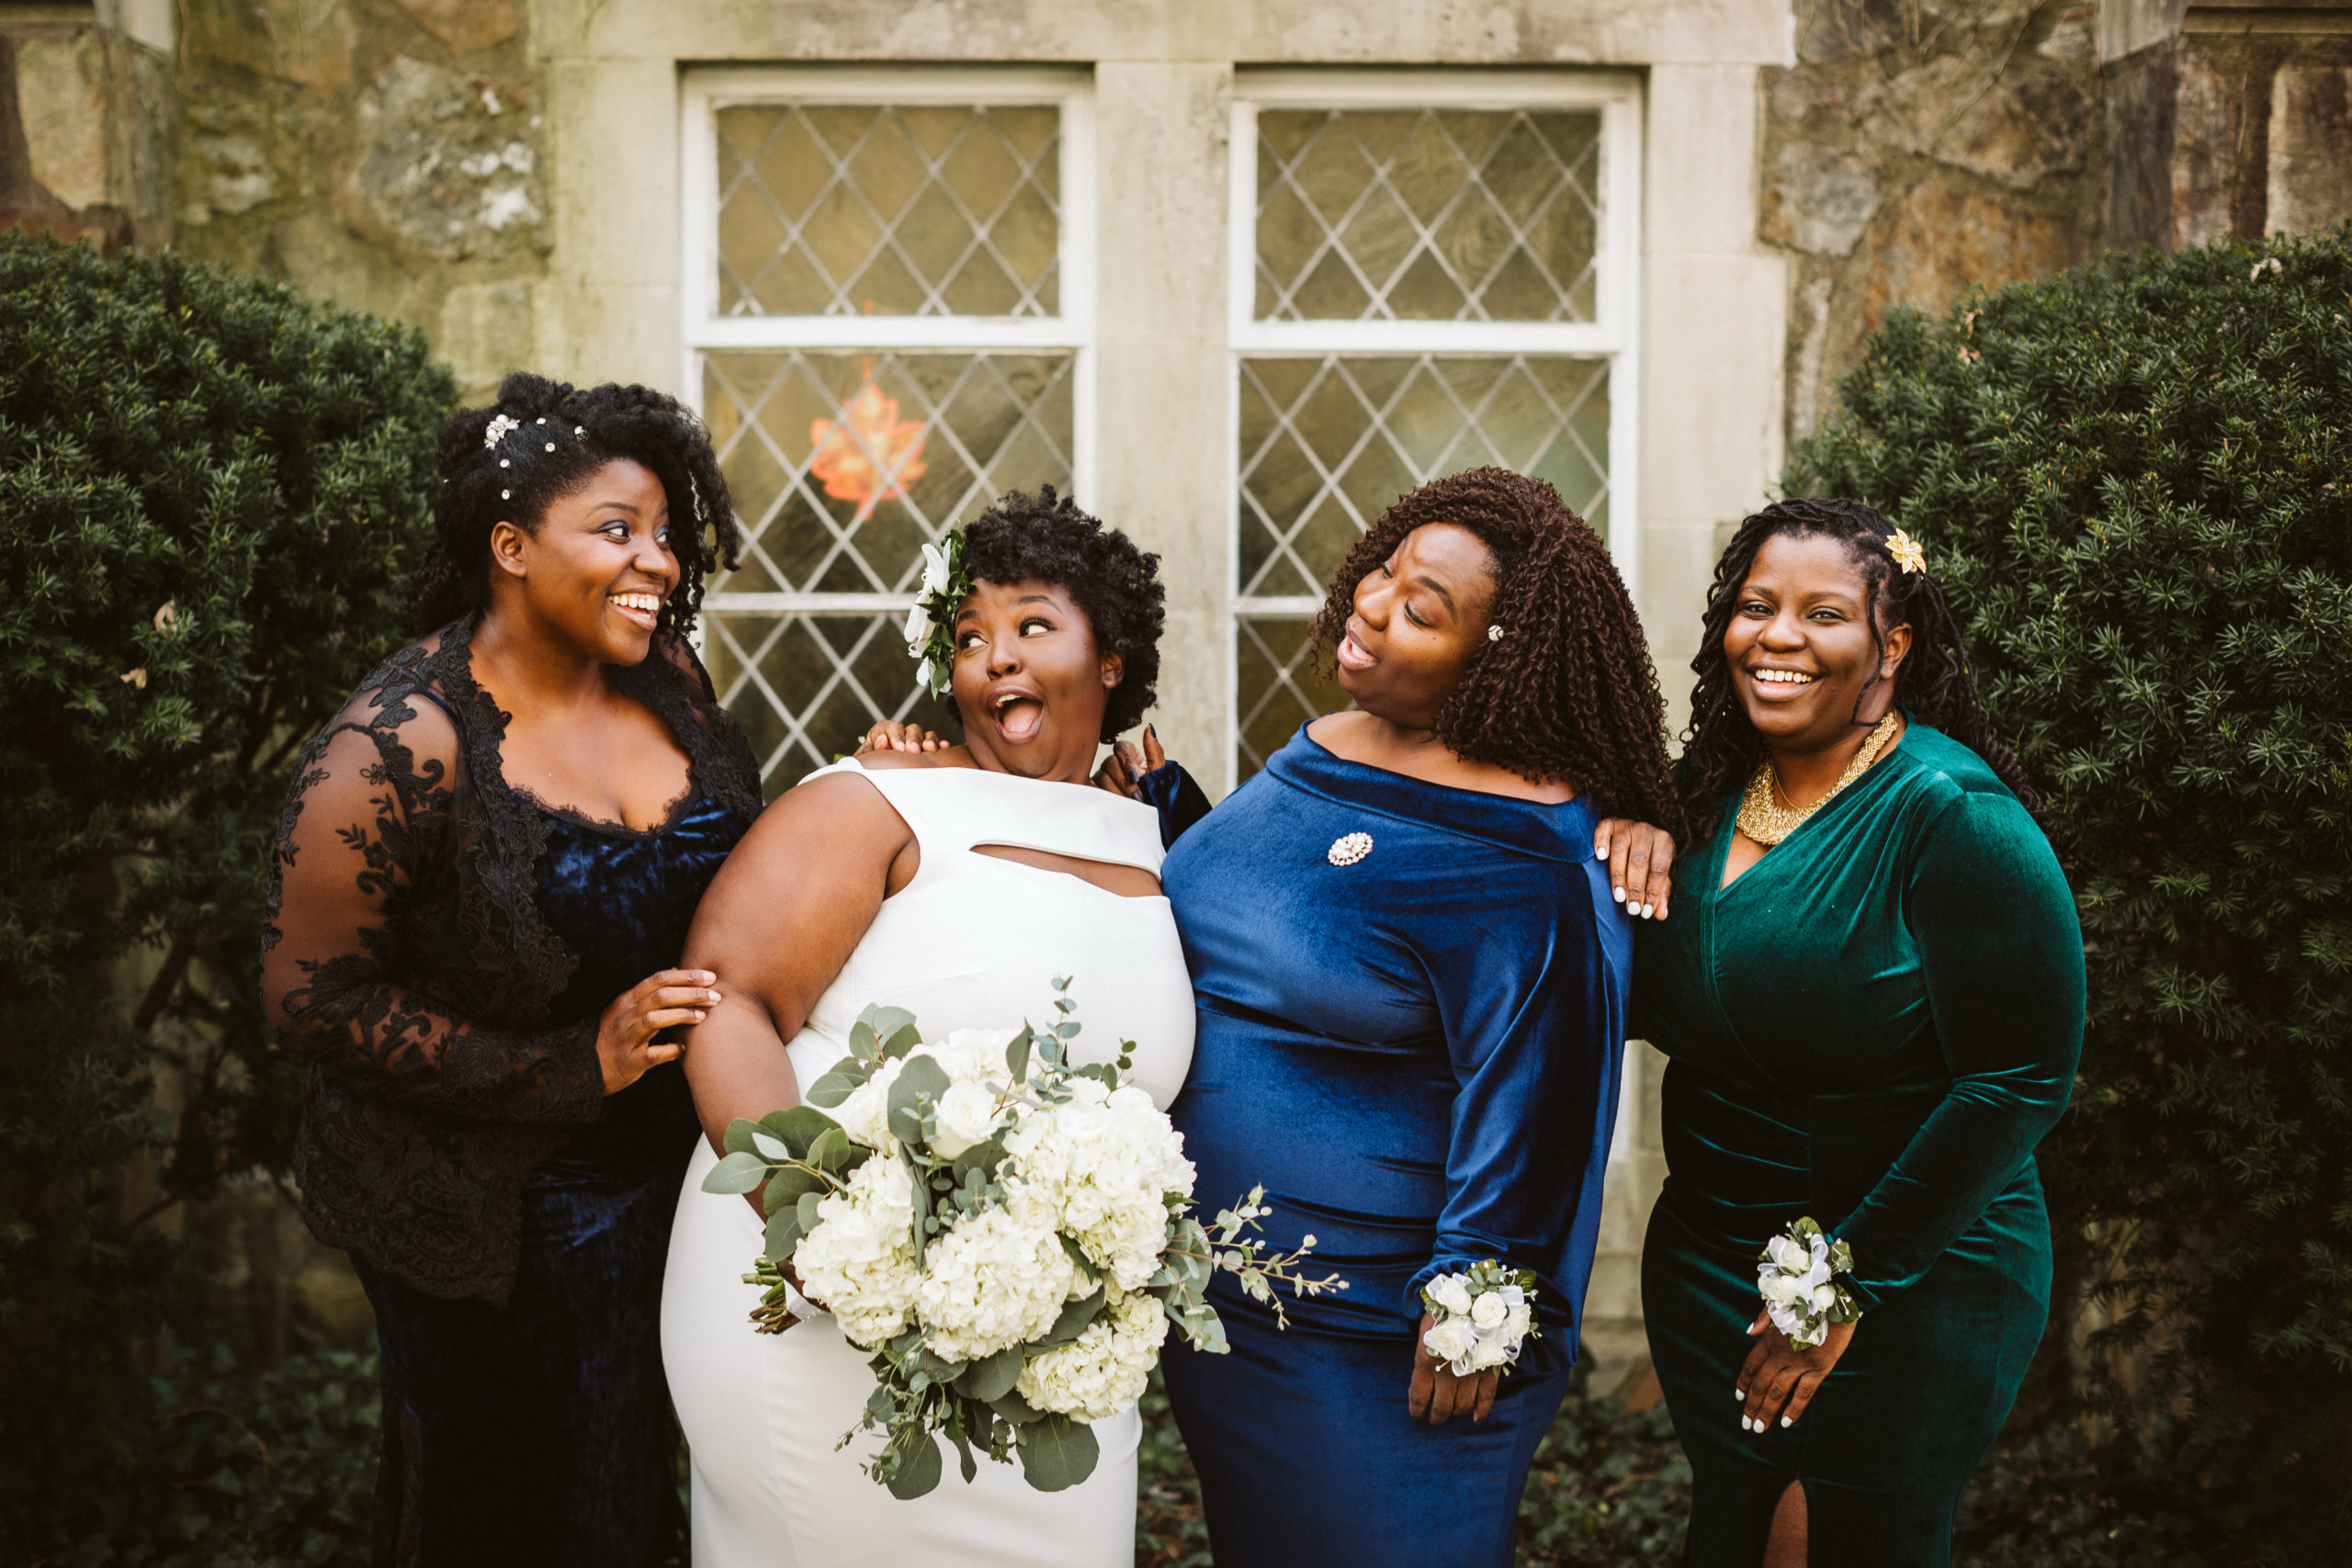 A bride and her family laugh together while posing for photos.